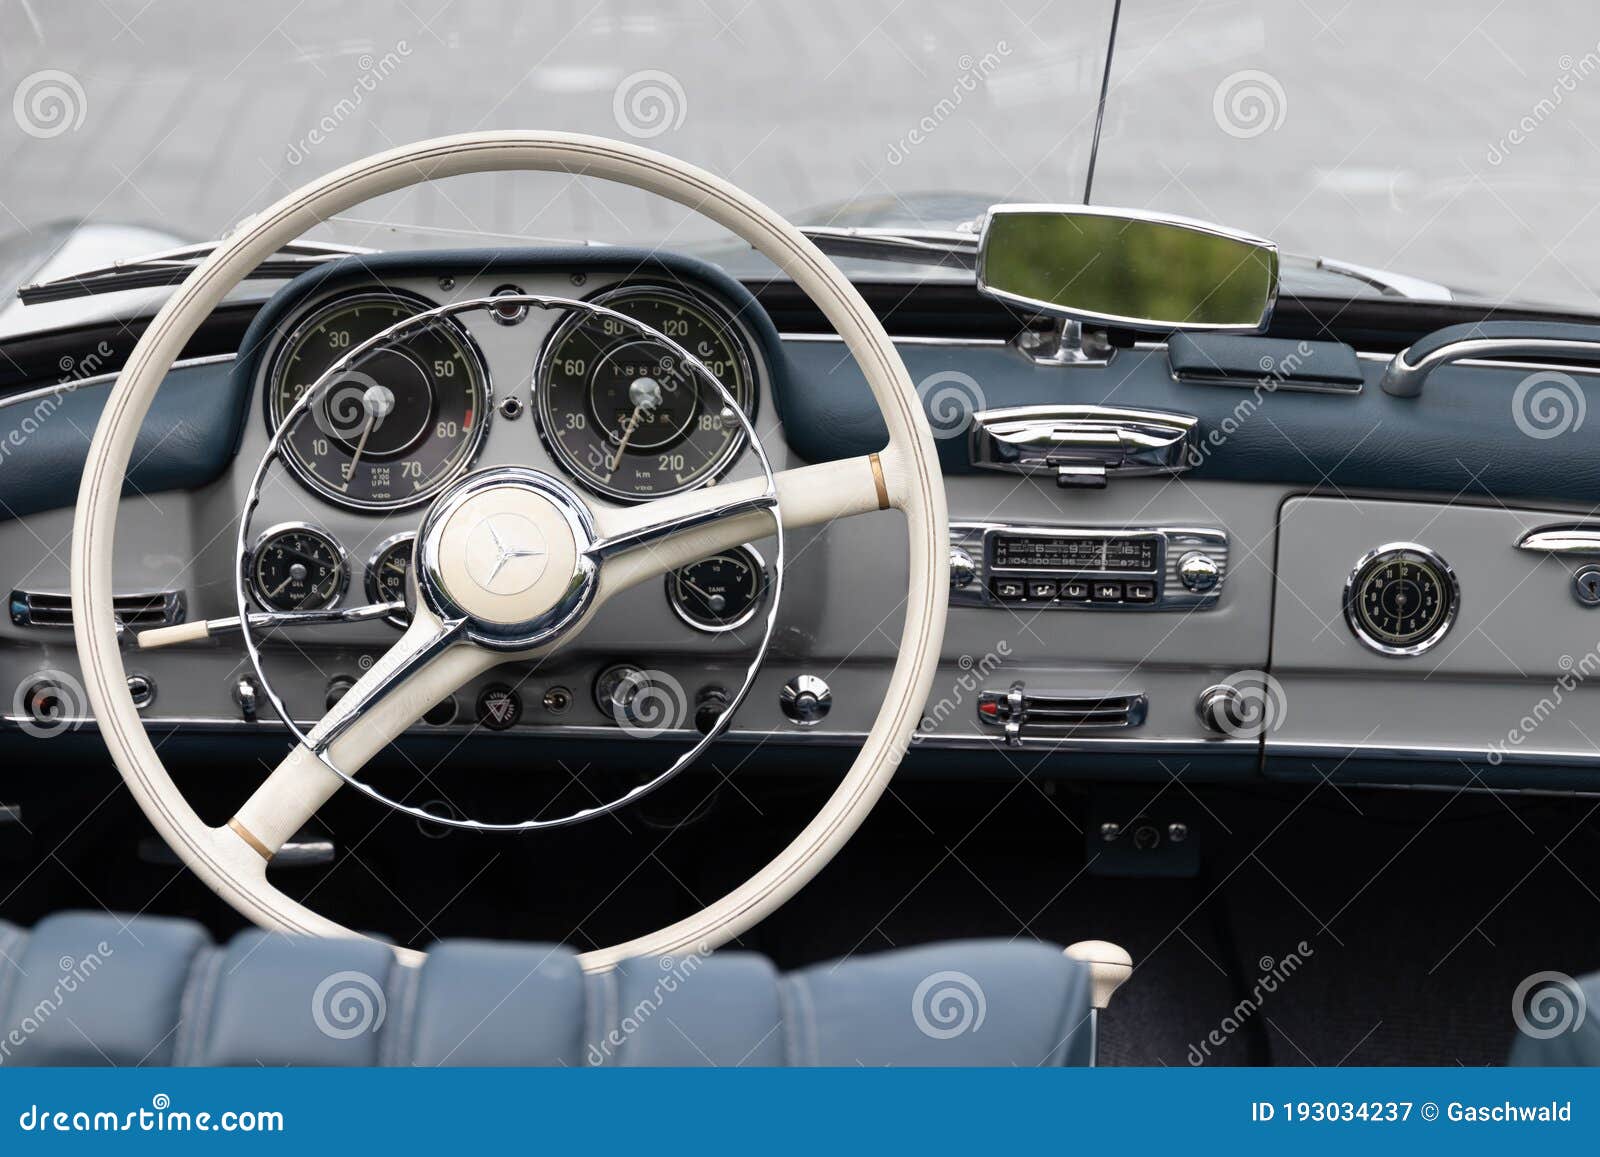 Interior And Dashboard Of A Mercedes Benz 190 Sl Cabrio German Oldtimer Car At The Cars Coffee Event At The Mercedes Benz Museum Editorial Photography Image Of Oldtimer Outdoor 193034237